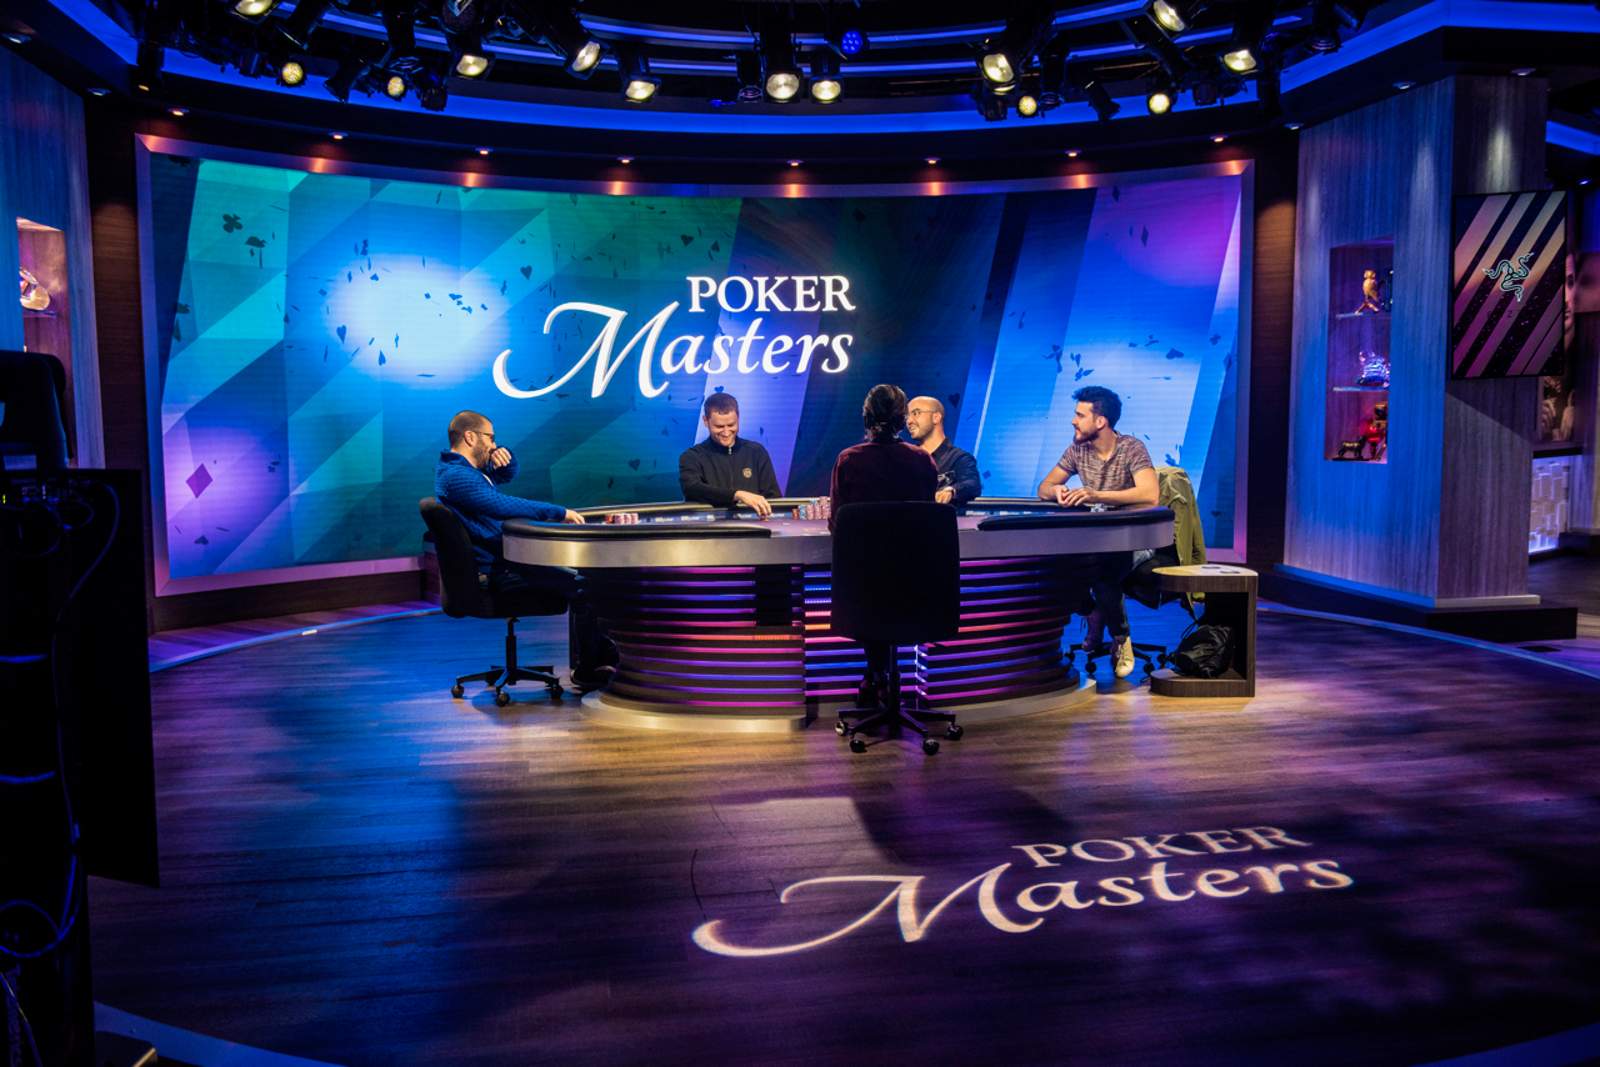 Relive Poker Masters $100K Main Event on PokerGO